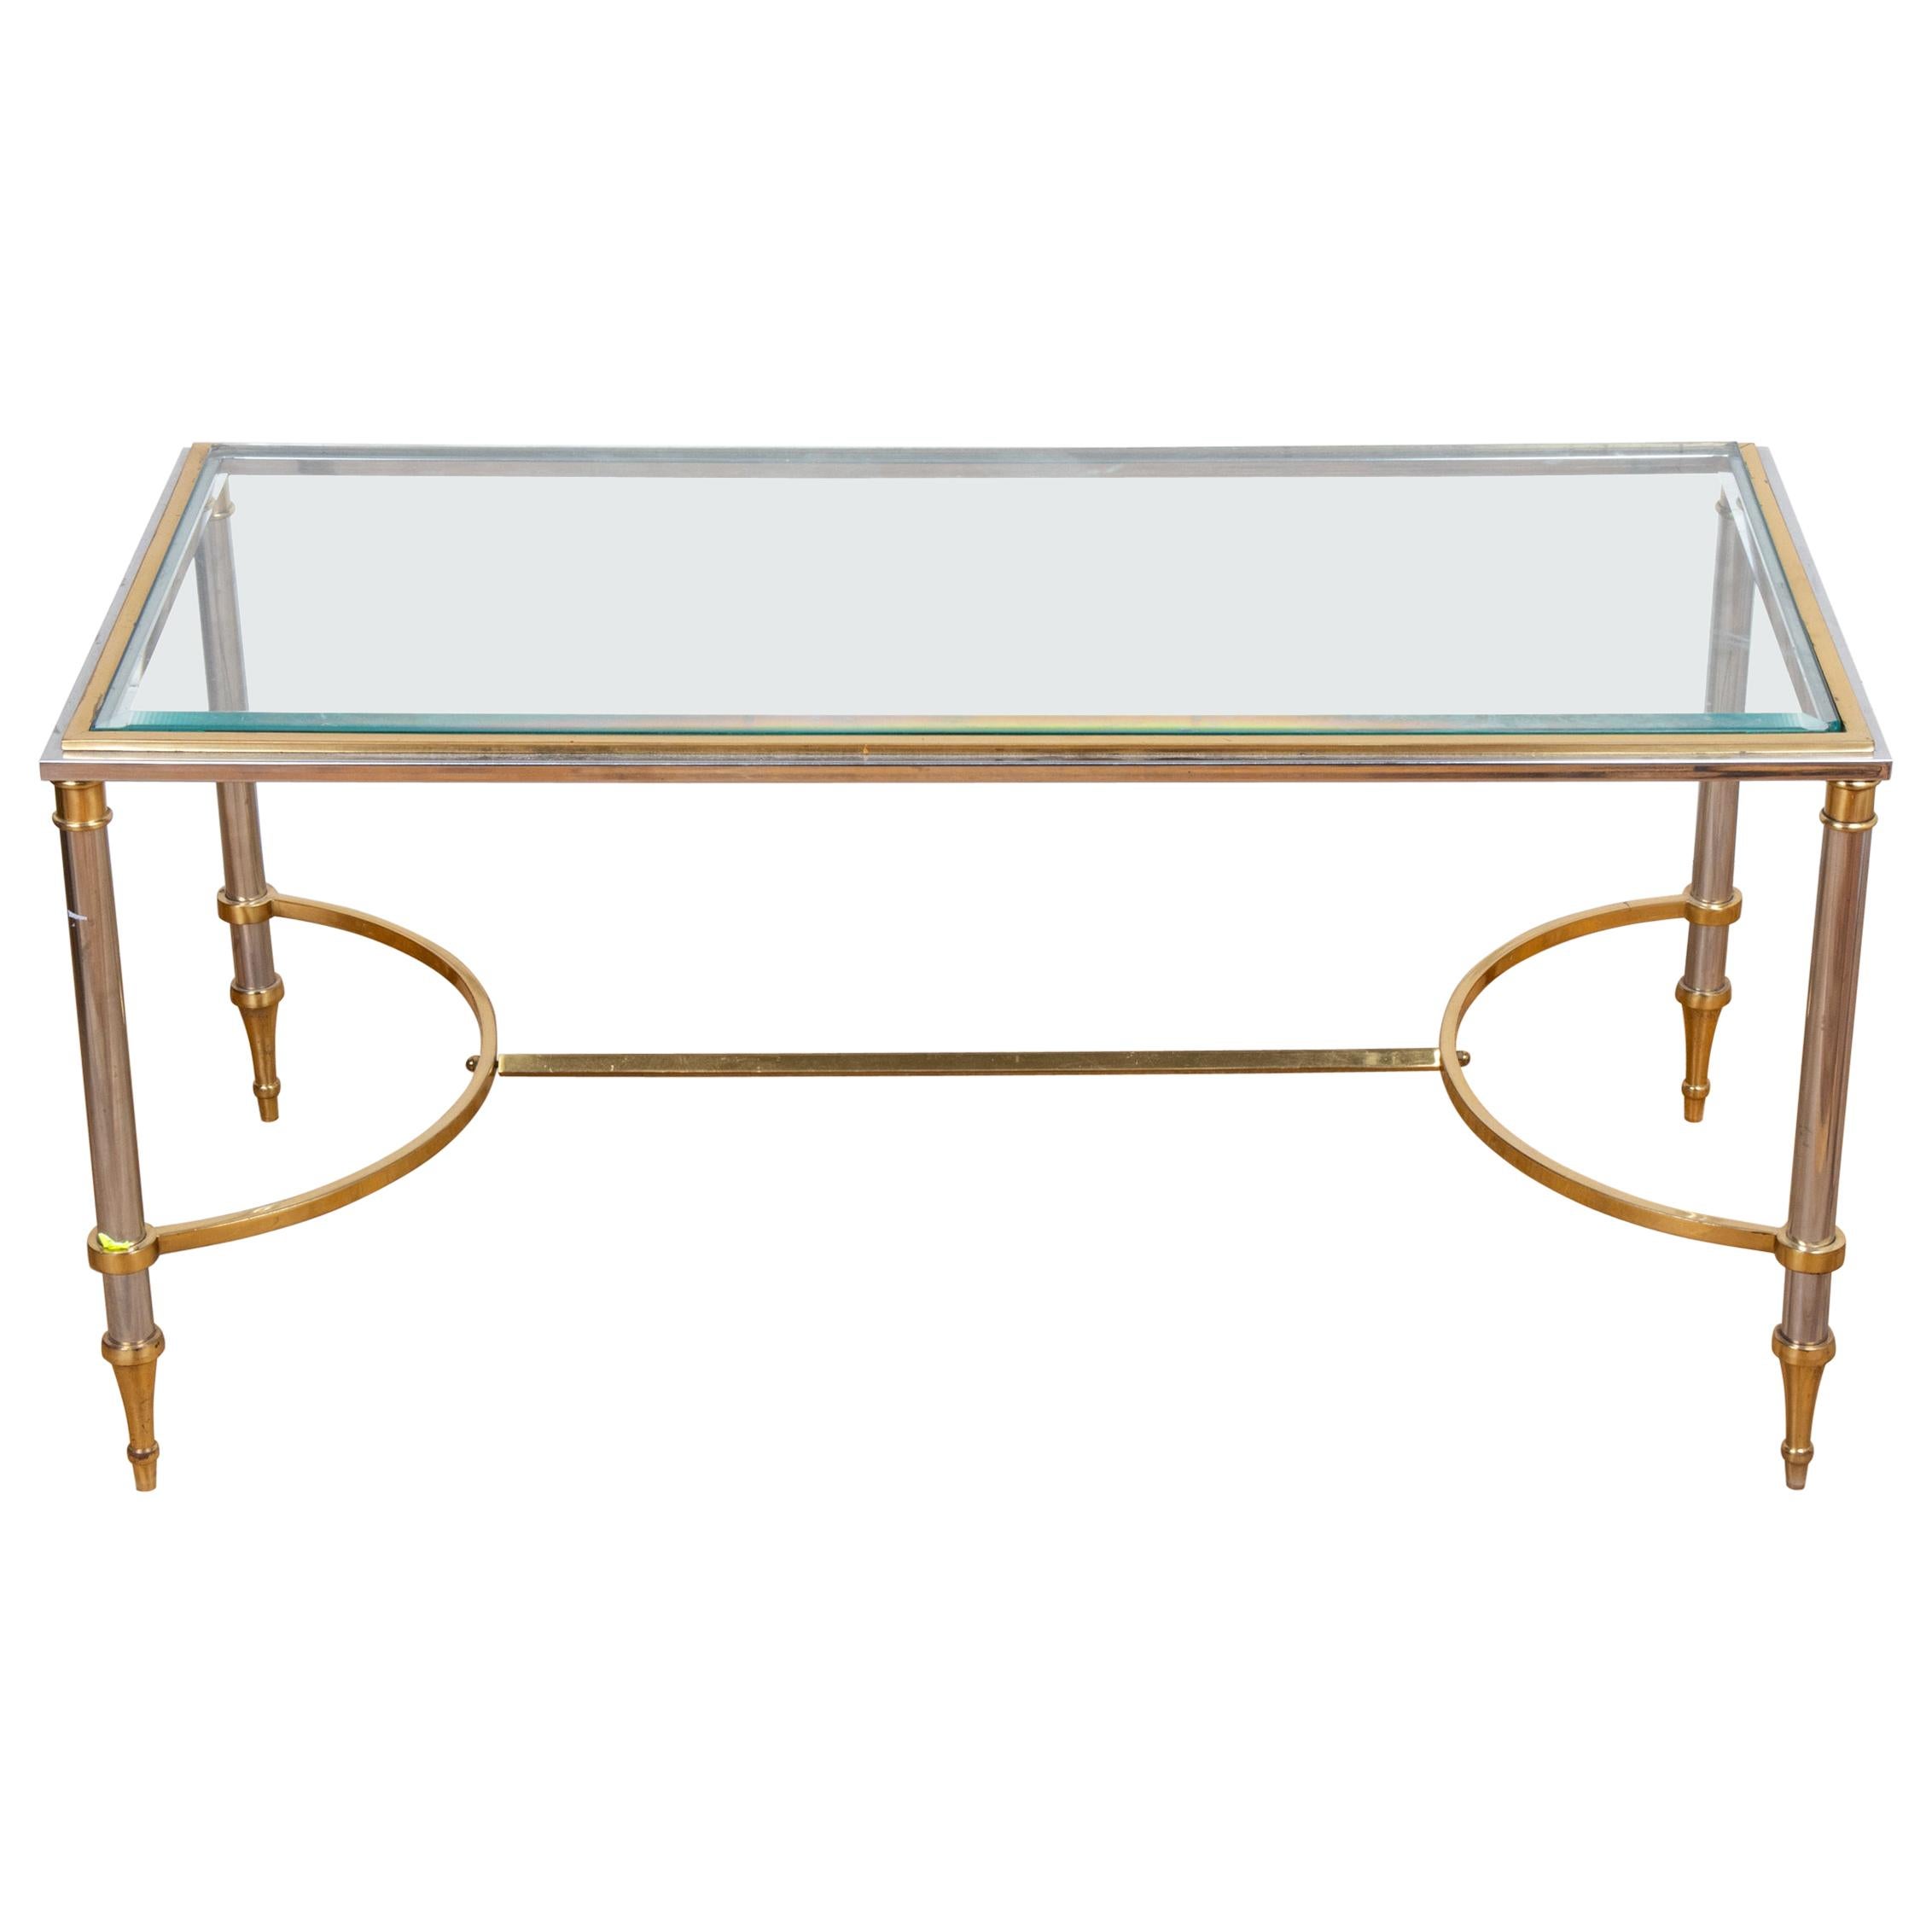 Maison Jansen Style Brass and Chrome Coffee Table